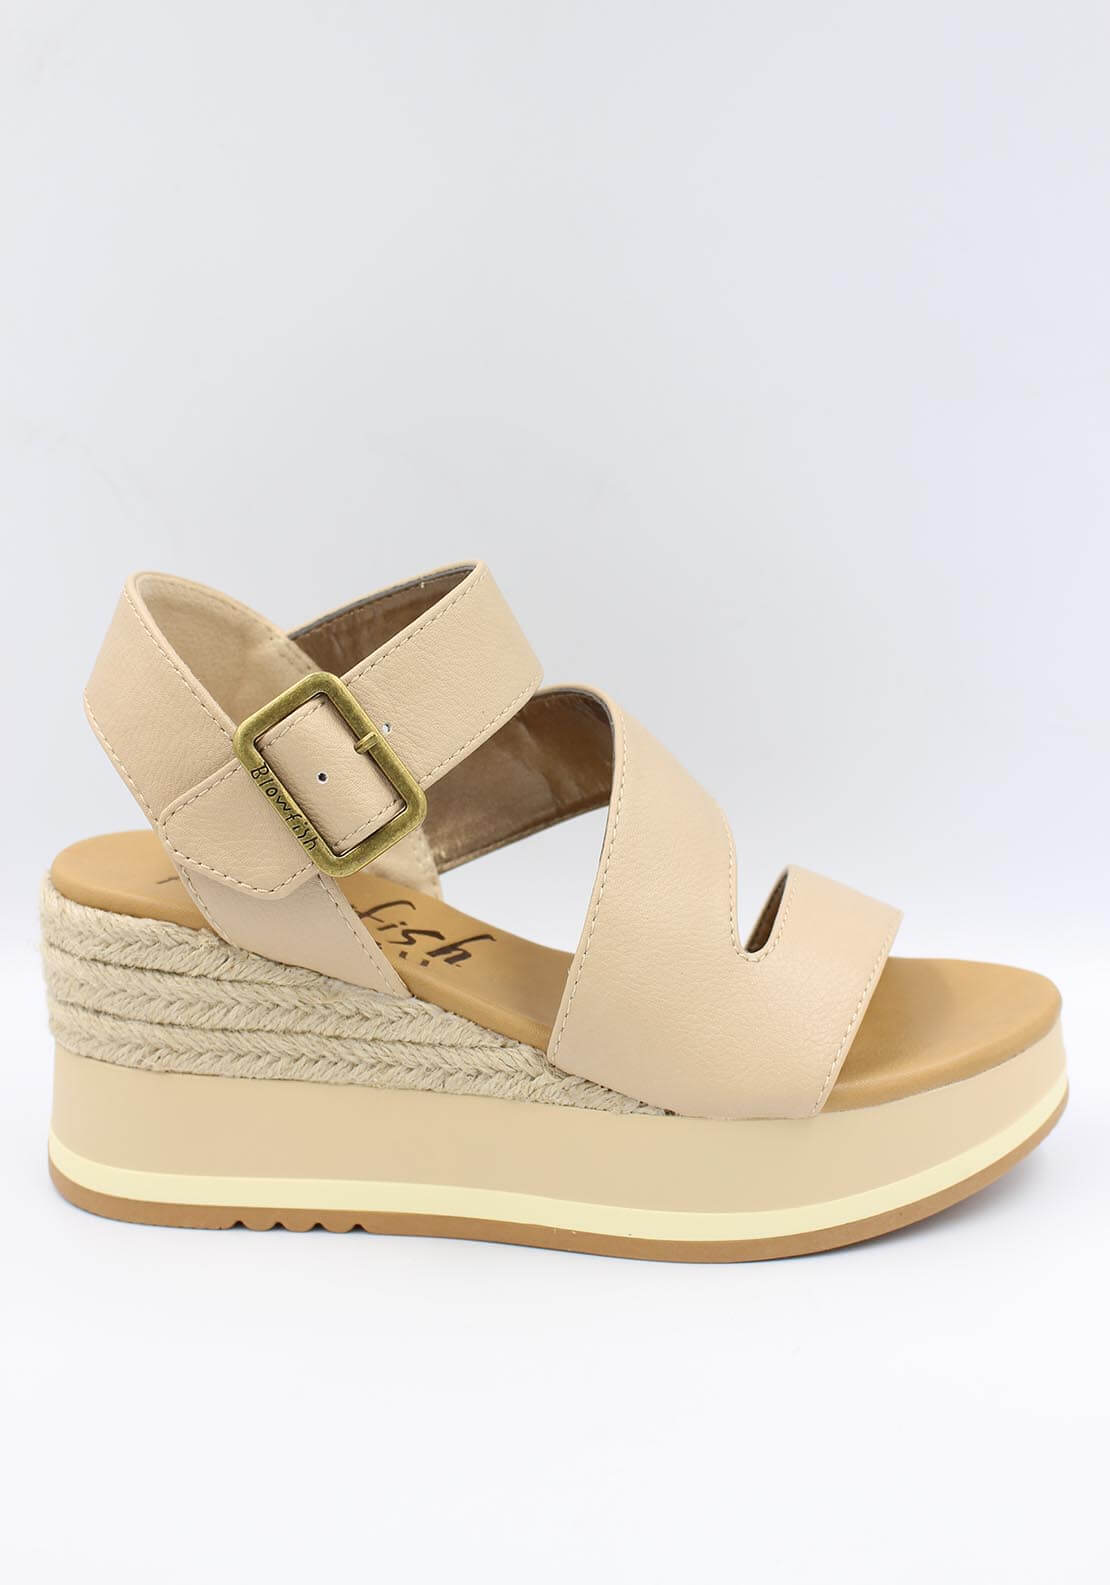 Blow Fish Solly Wedge Sandal 2 Shaws Department Stores